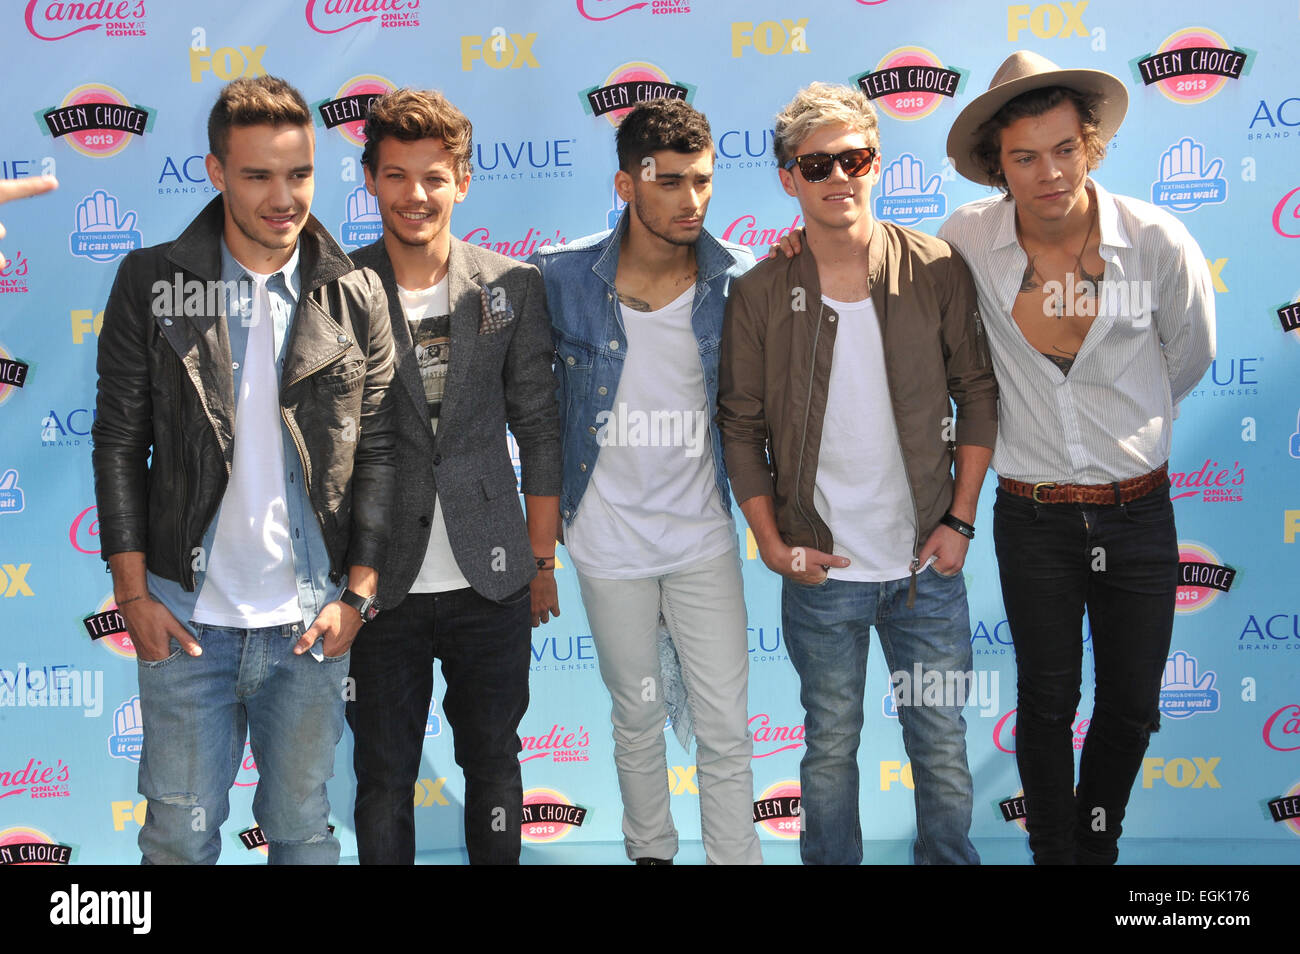 LOS ANGELES, CA - AUGUST 11, 2013: Pop group One Direction - Liam Payne, Louis Tomlinson, Zayn Malik, Niall Horan & Harry Styles - at the 2013 Teen Choice Awards at the Gibson Amphitheatre, Universal City, Hollywood. Stock Photo